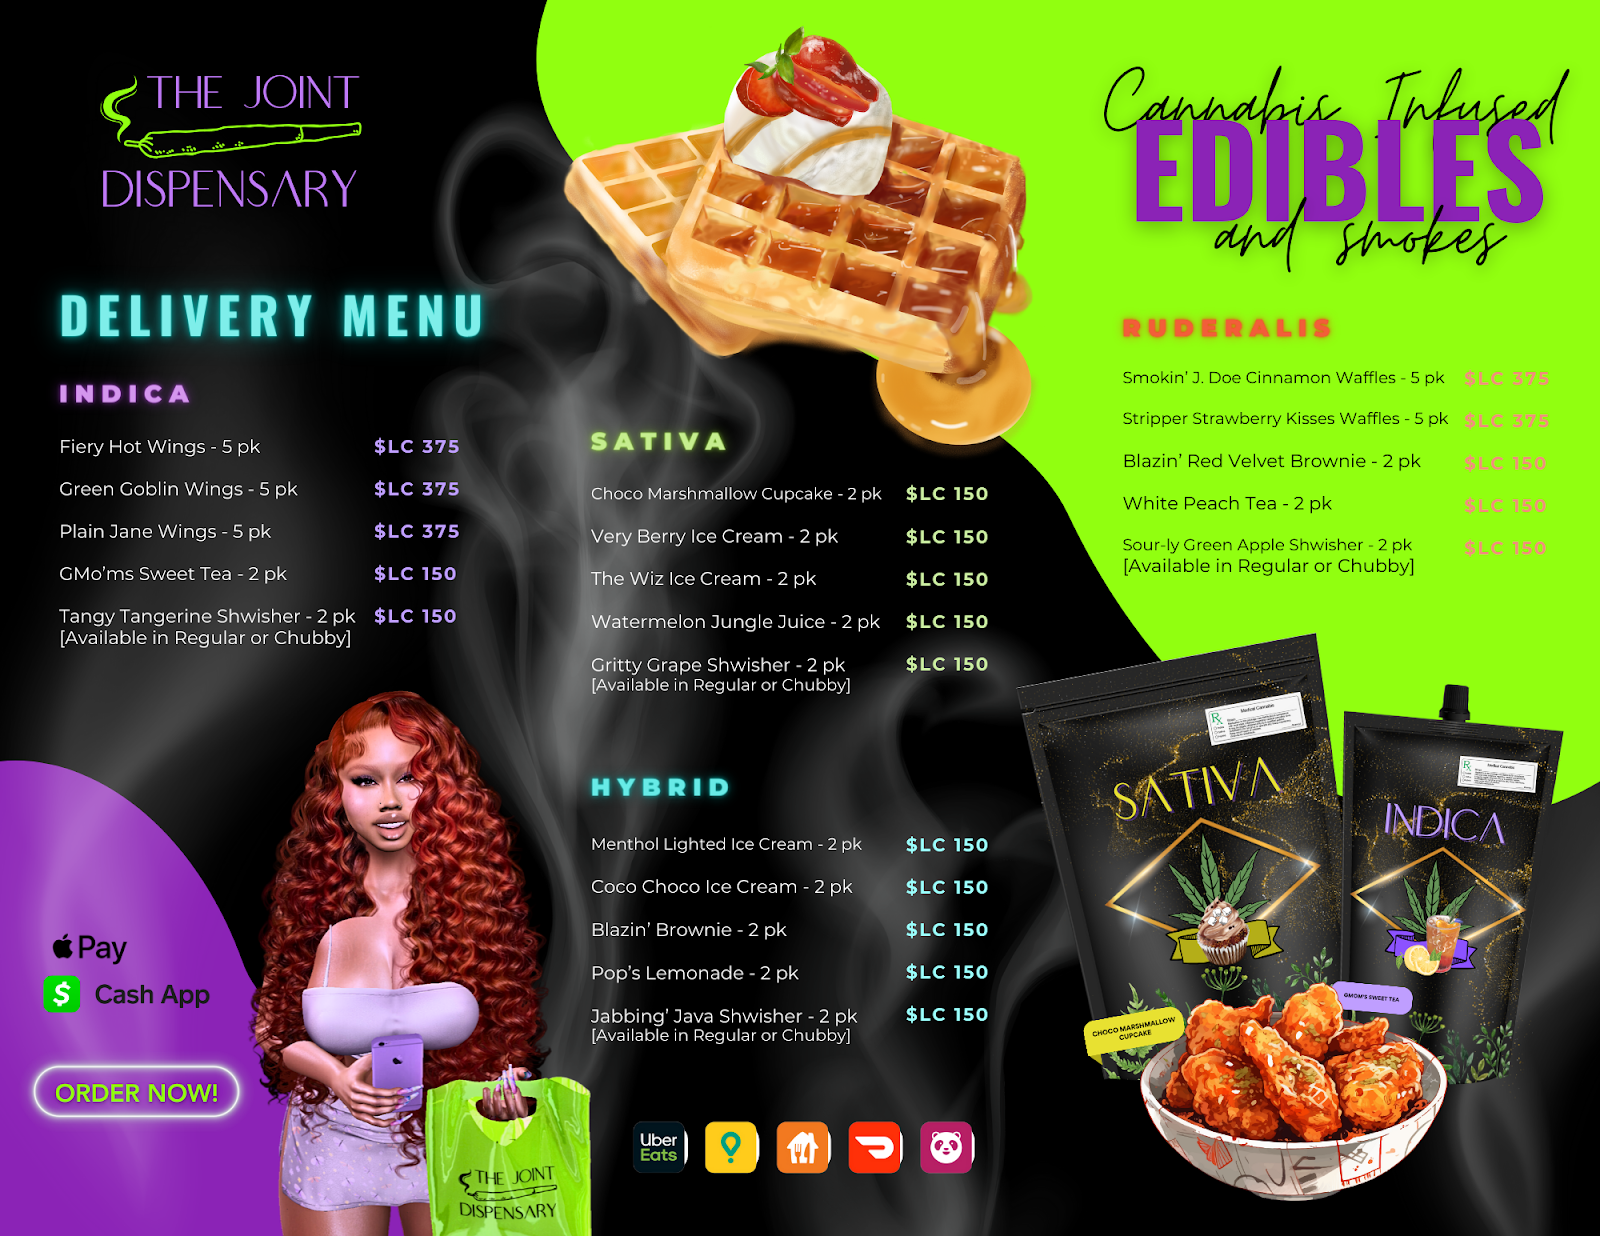 DOWNLOAD our Delivery Menu